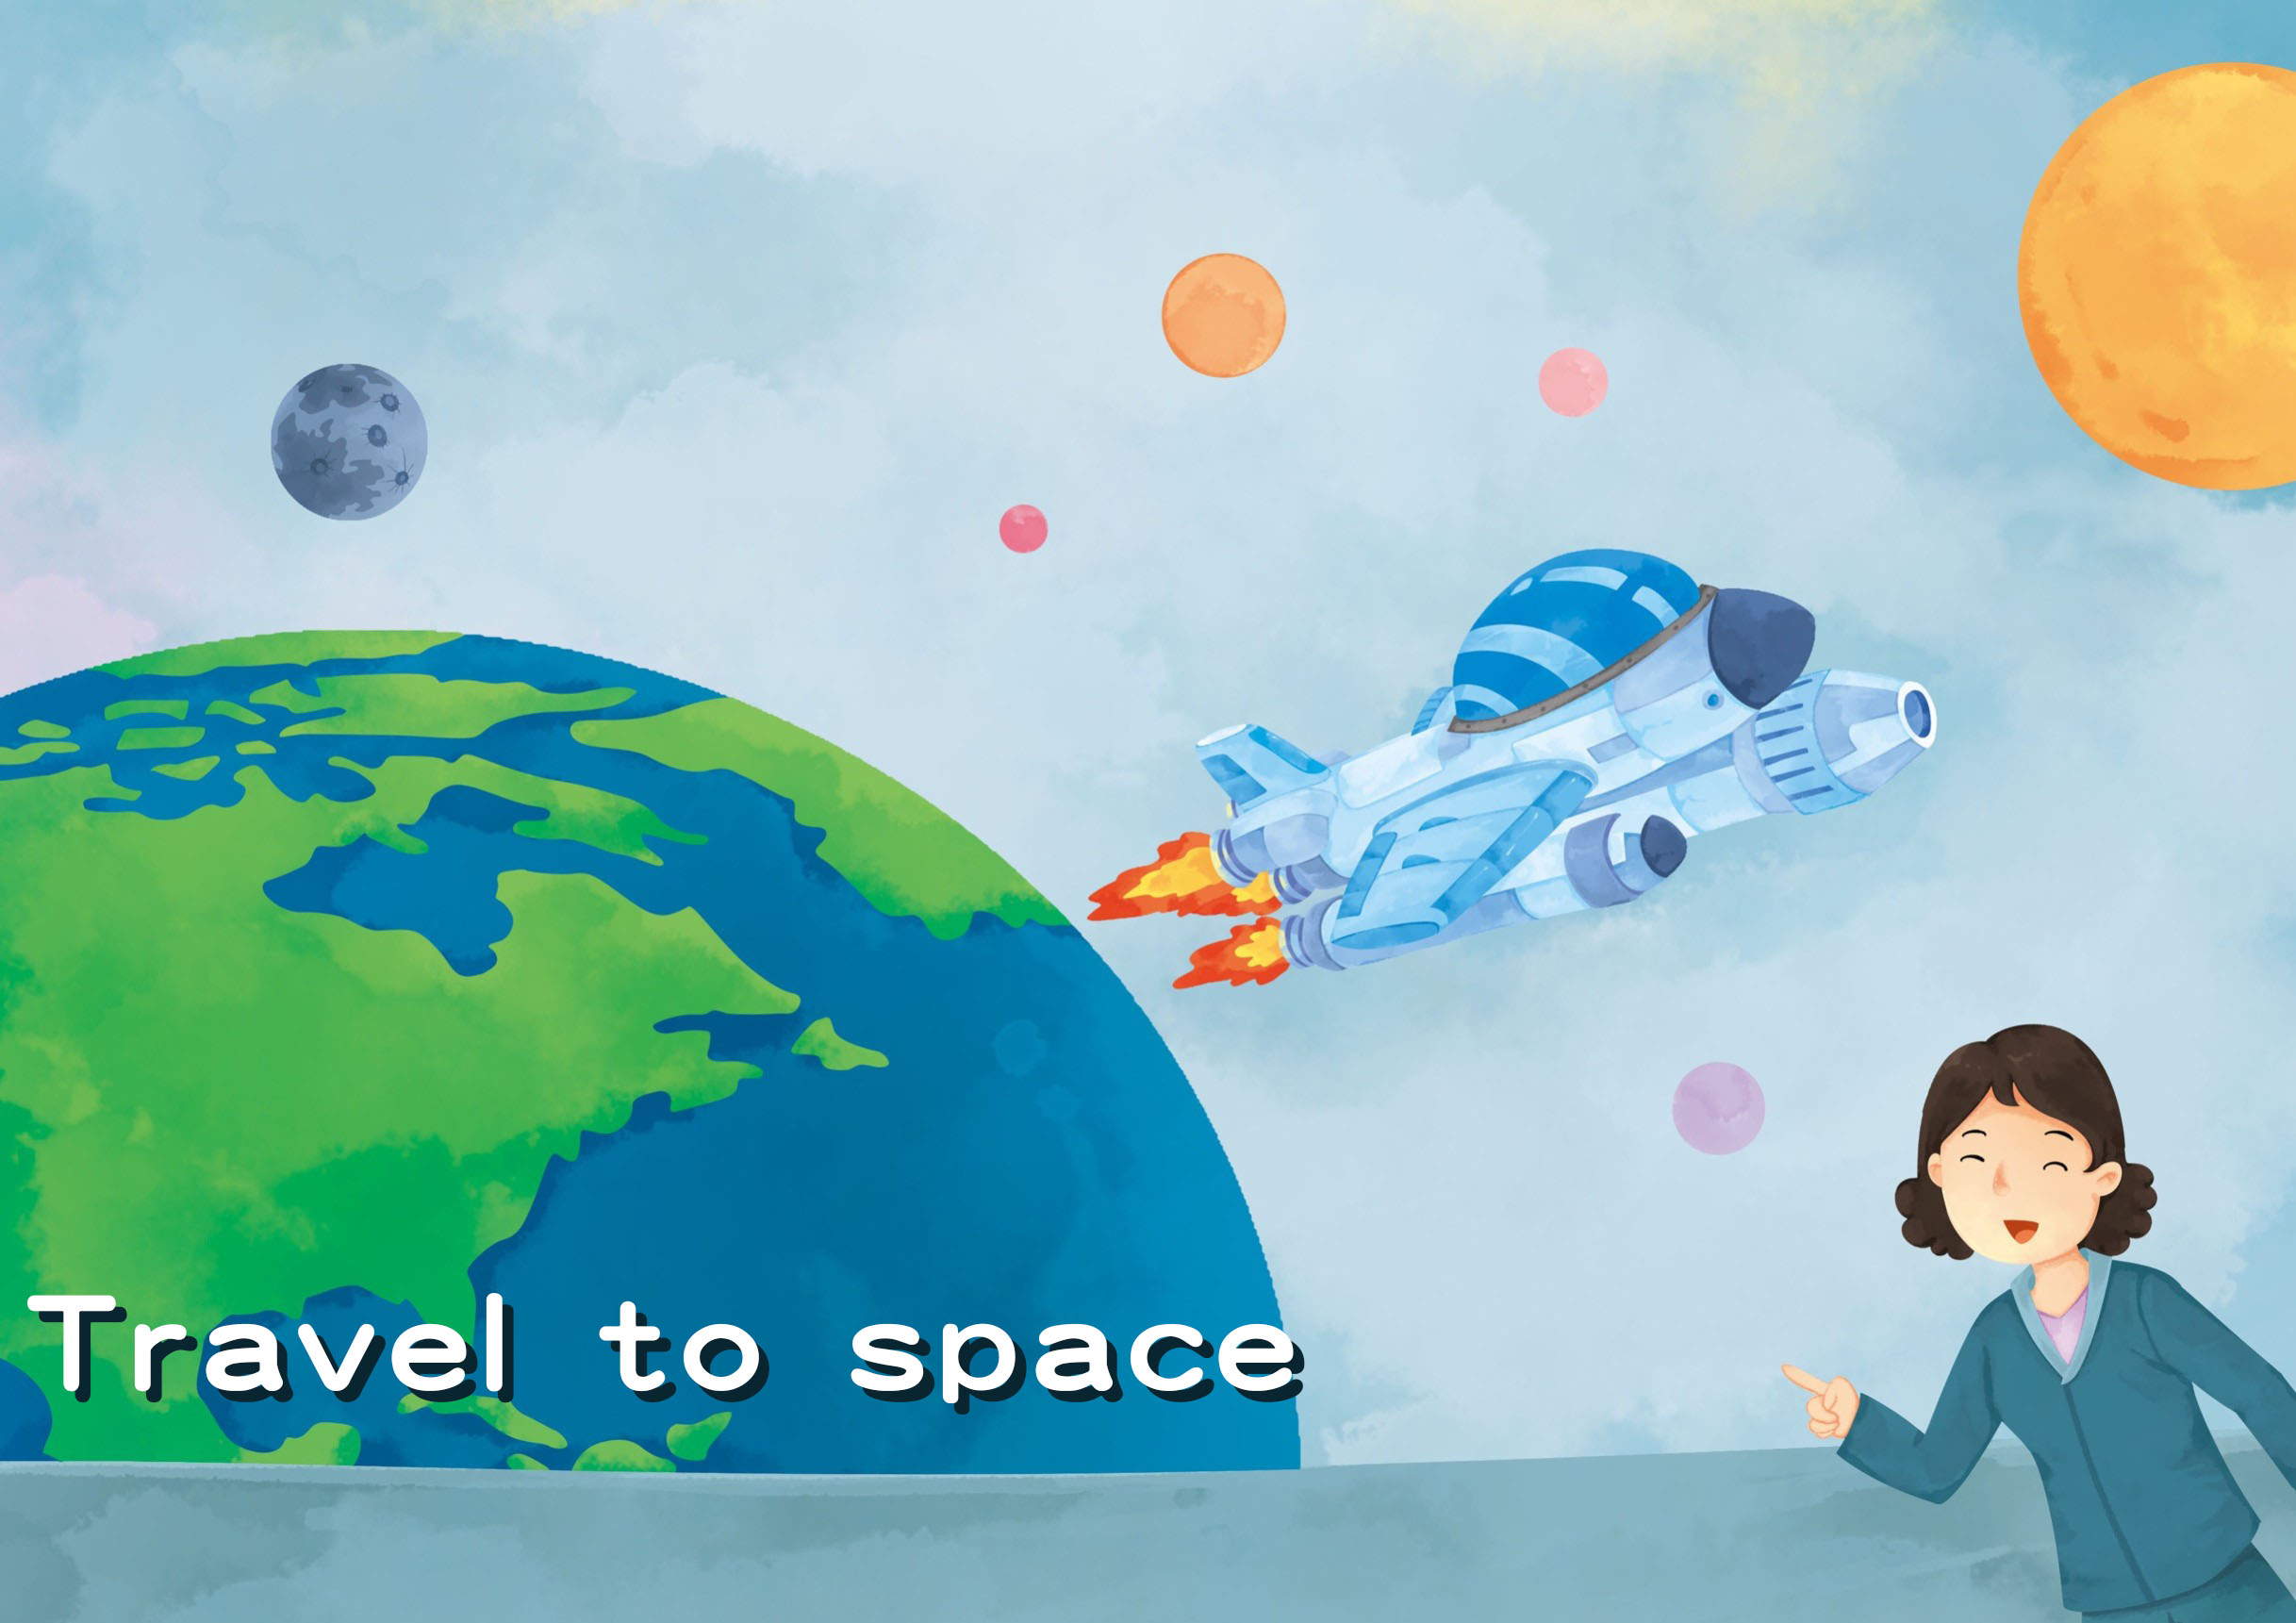 Travel to space